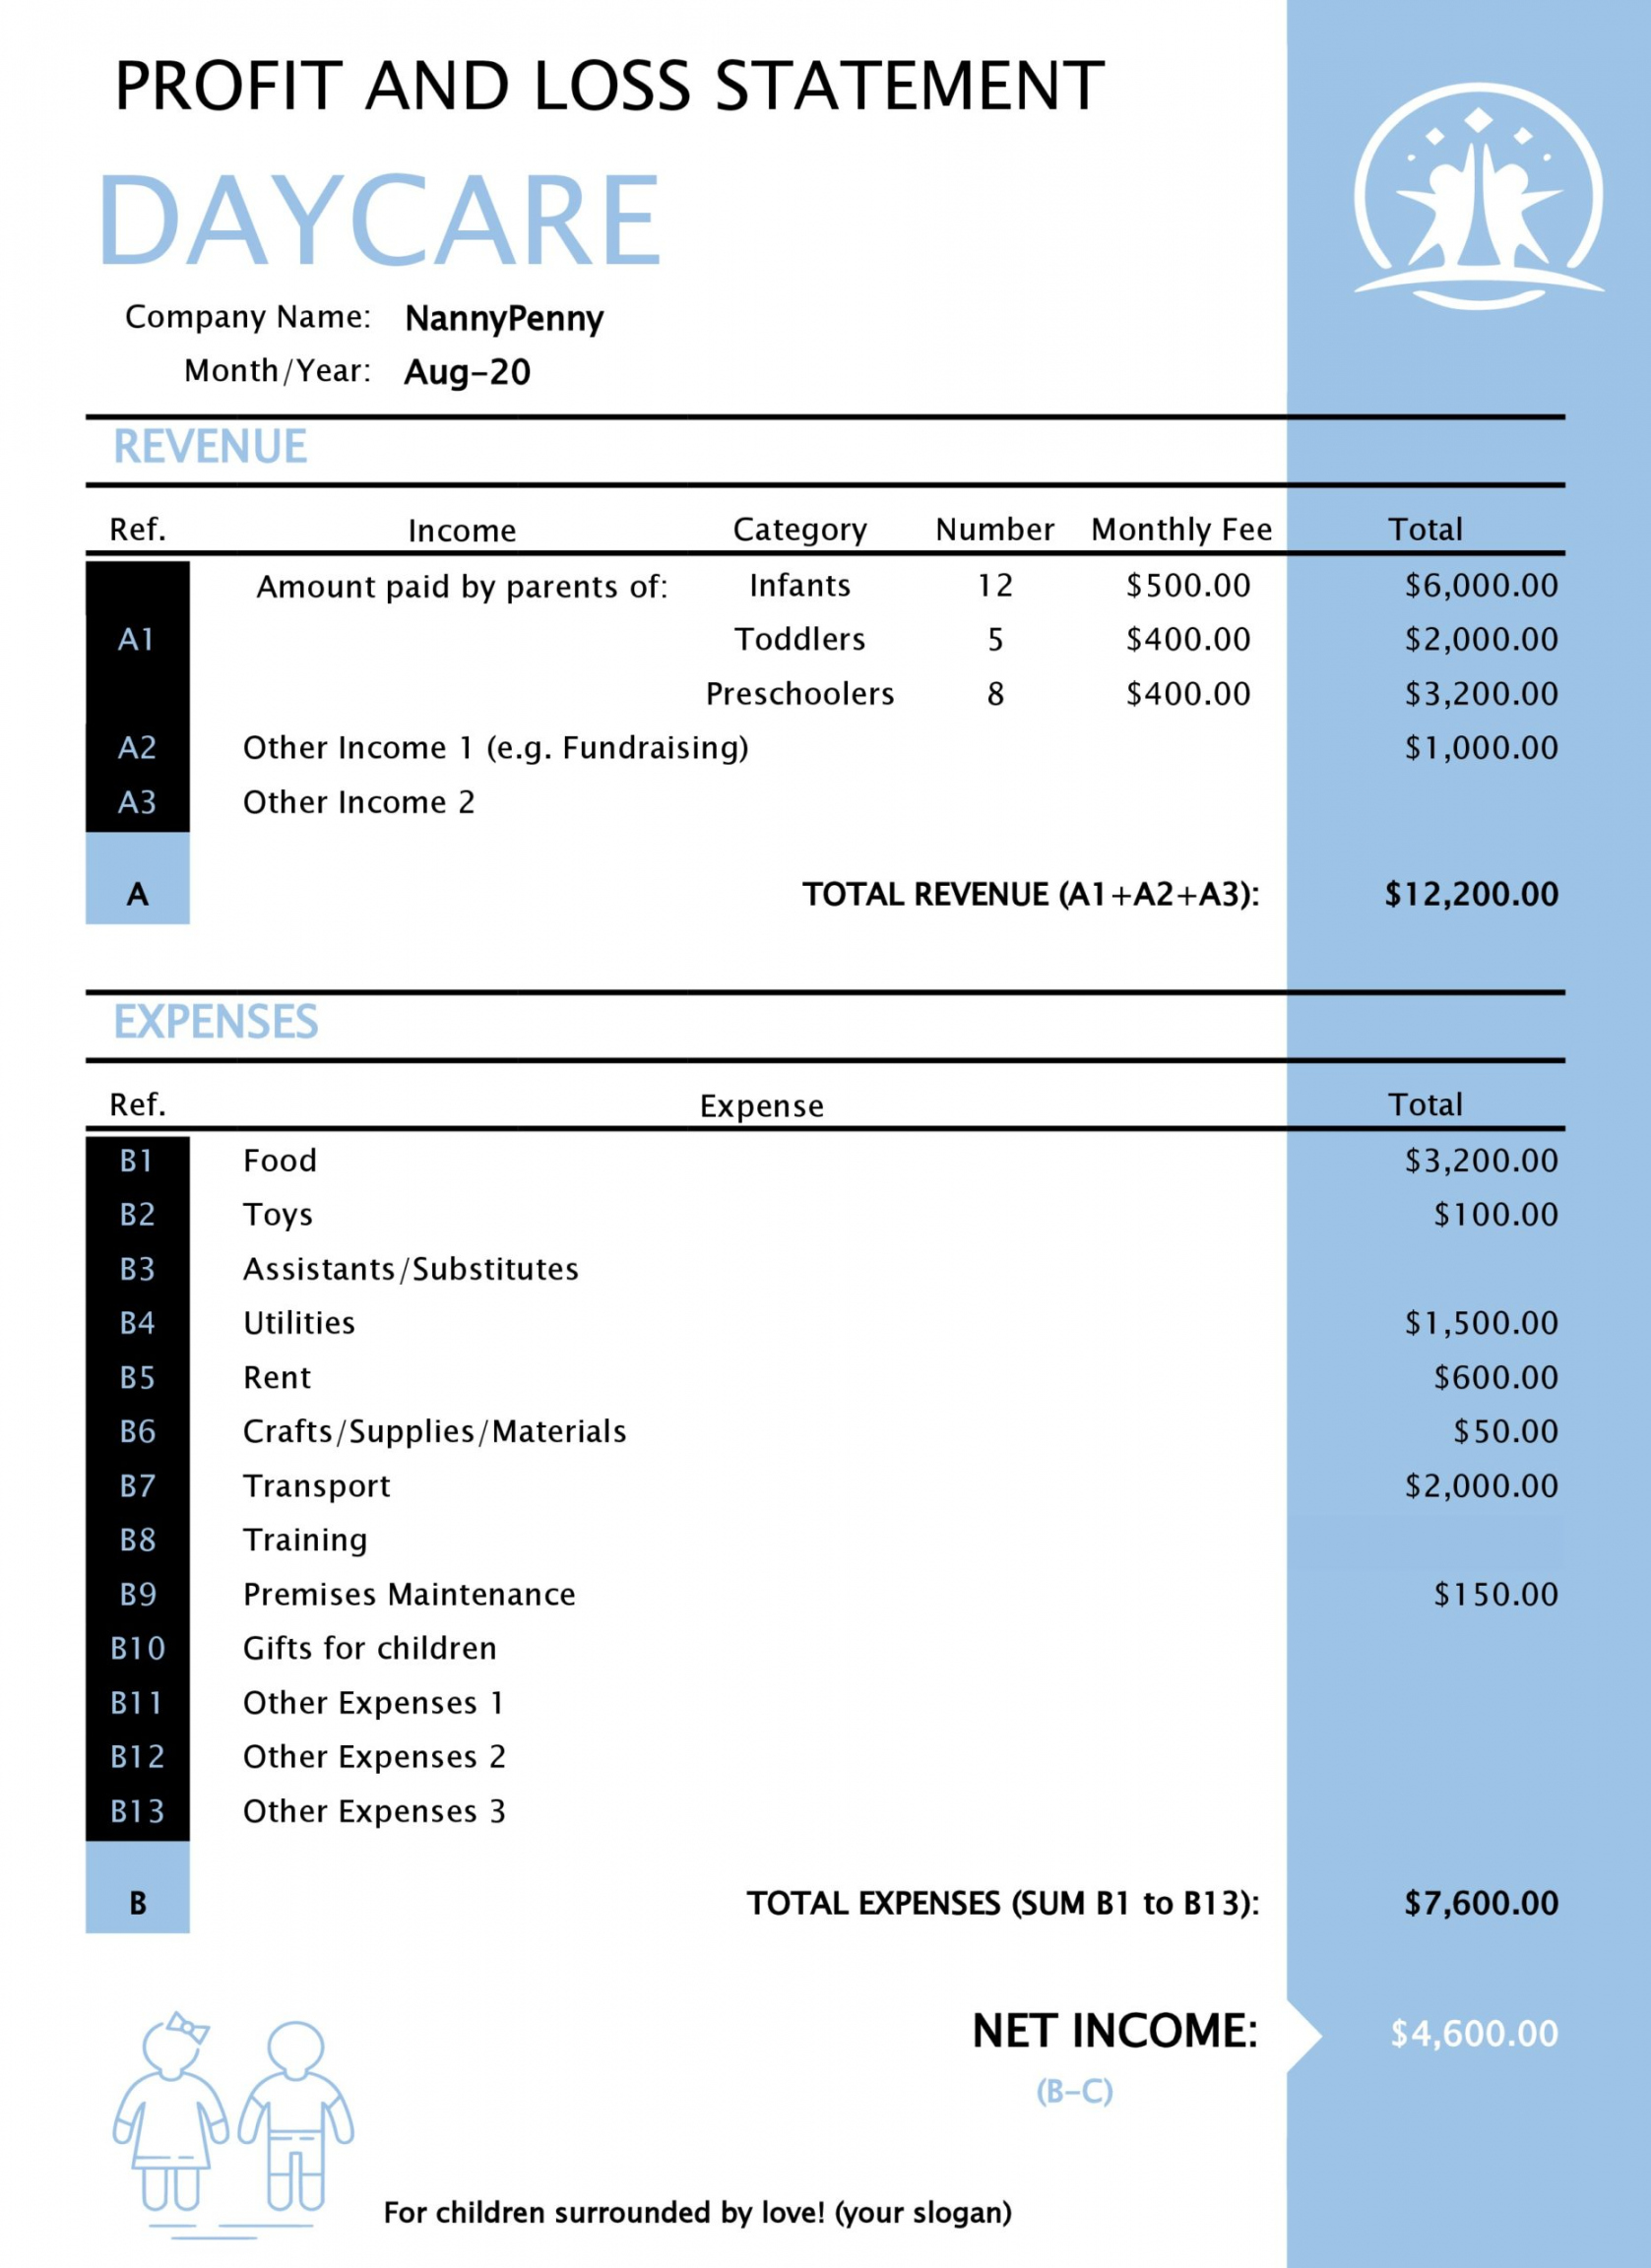 Profit and Loss Statement Templates & Forms [Excel, PDF]